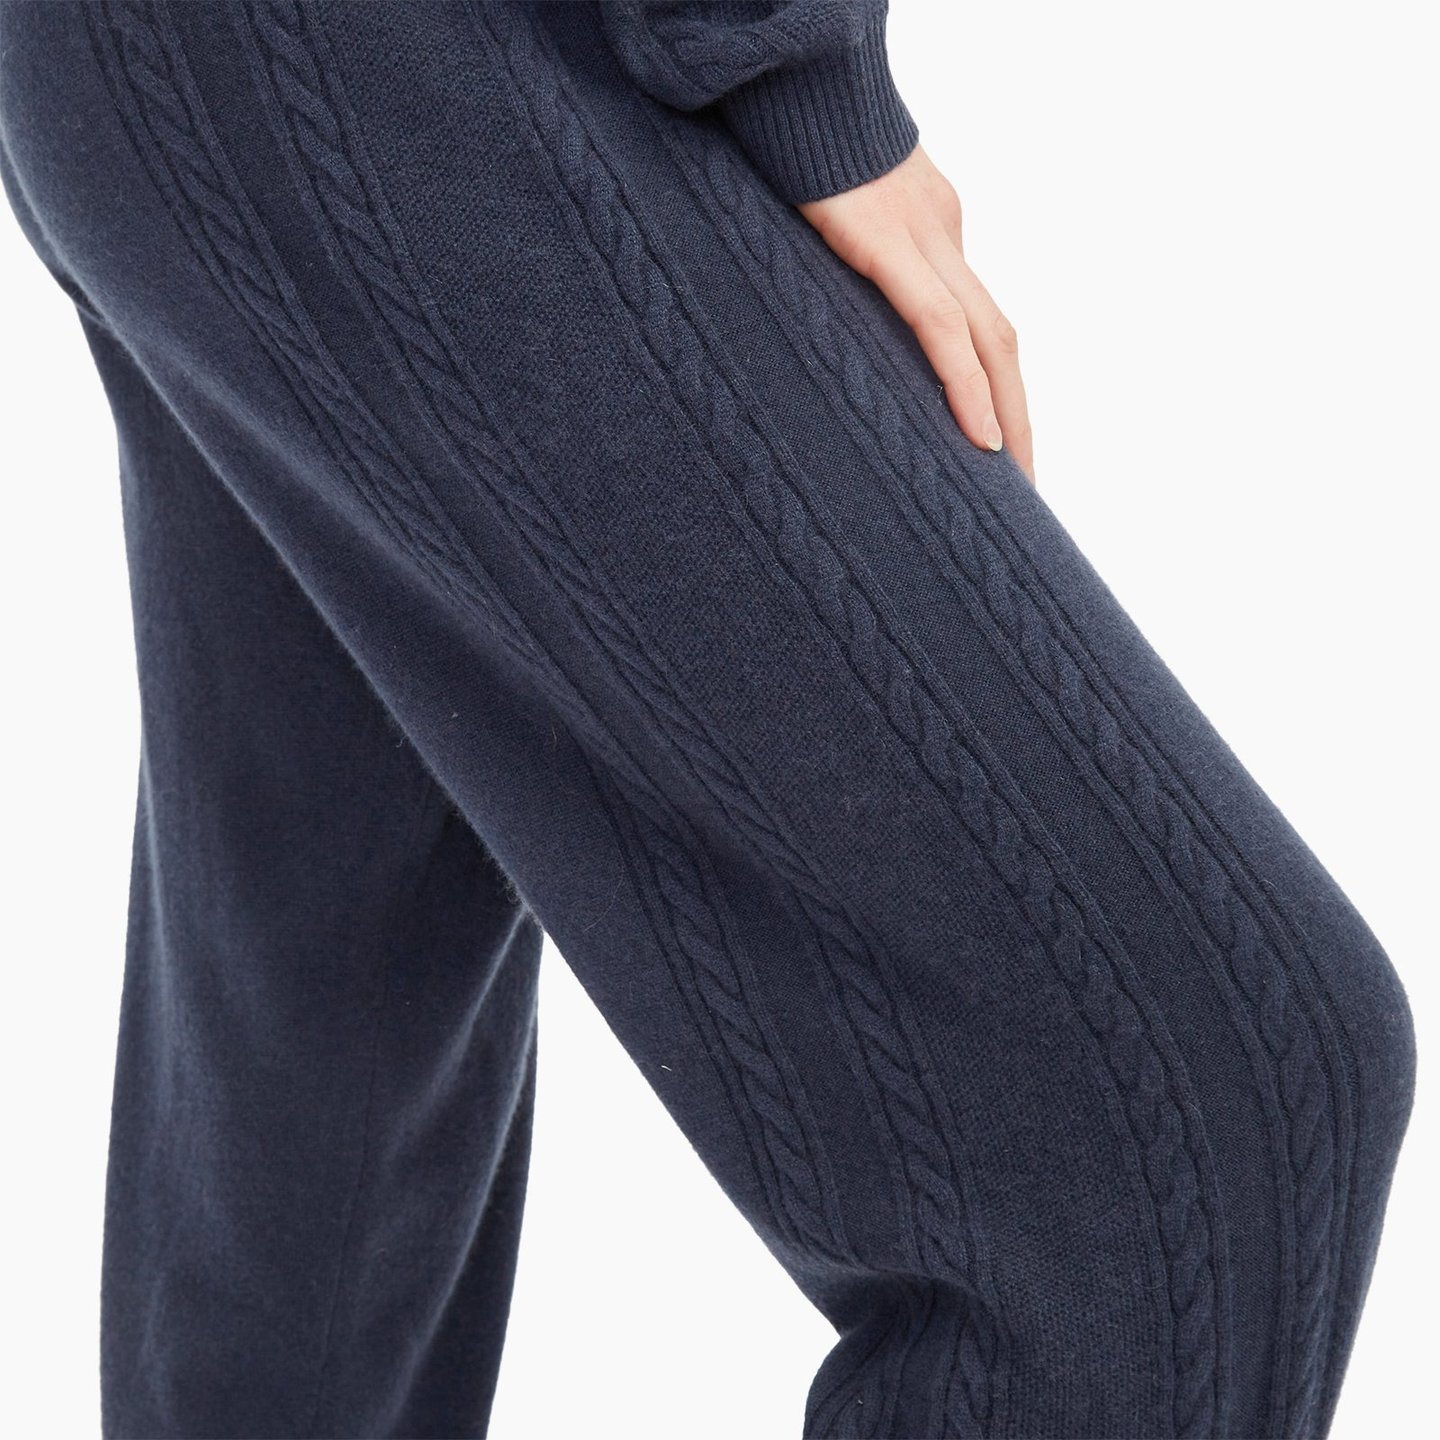 NWEB000842_Cashmere_Cable_Jogger_Stone_Blue_016_1440x.jpg